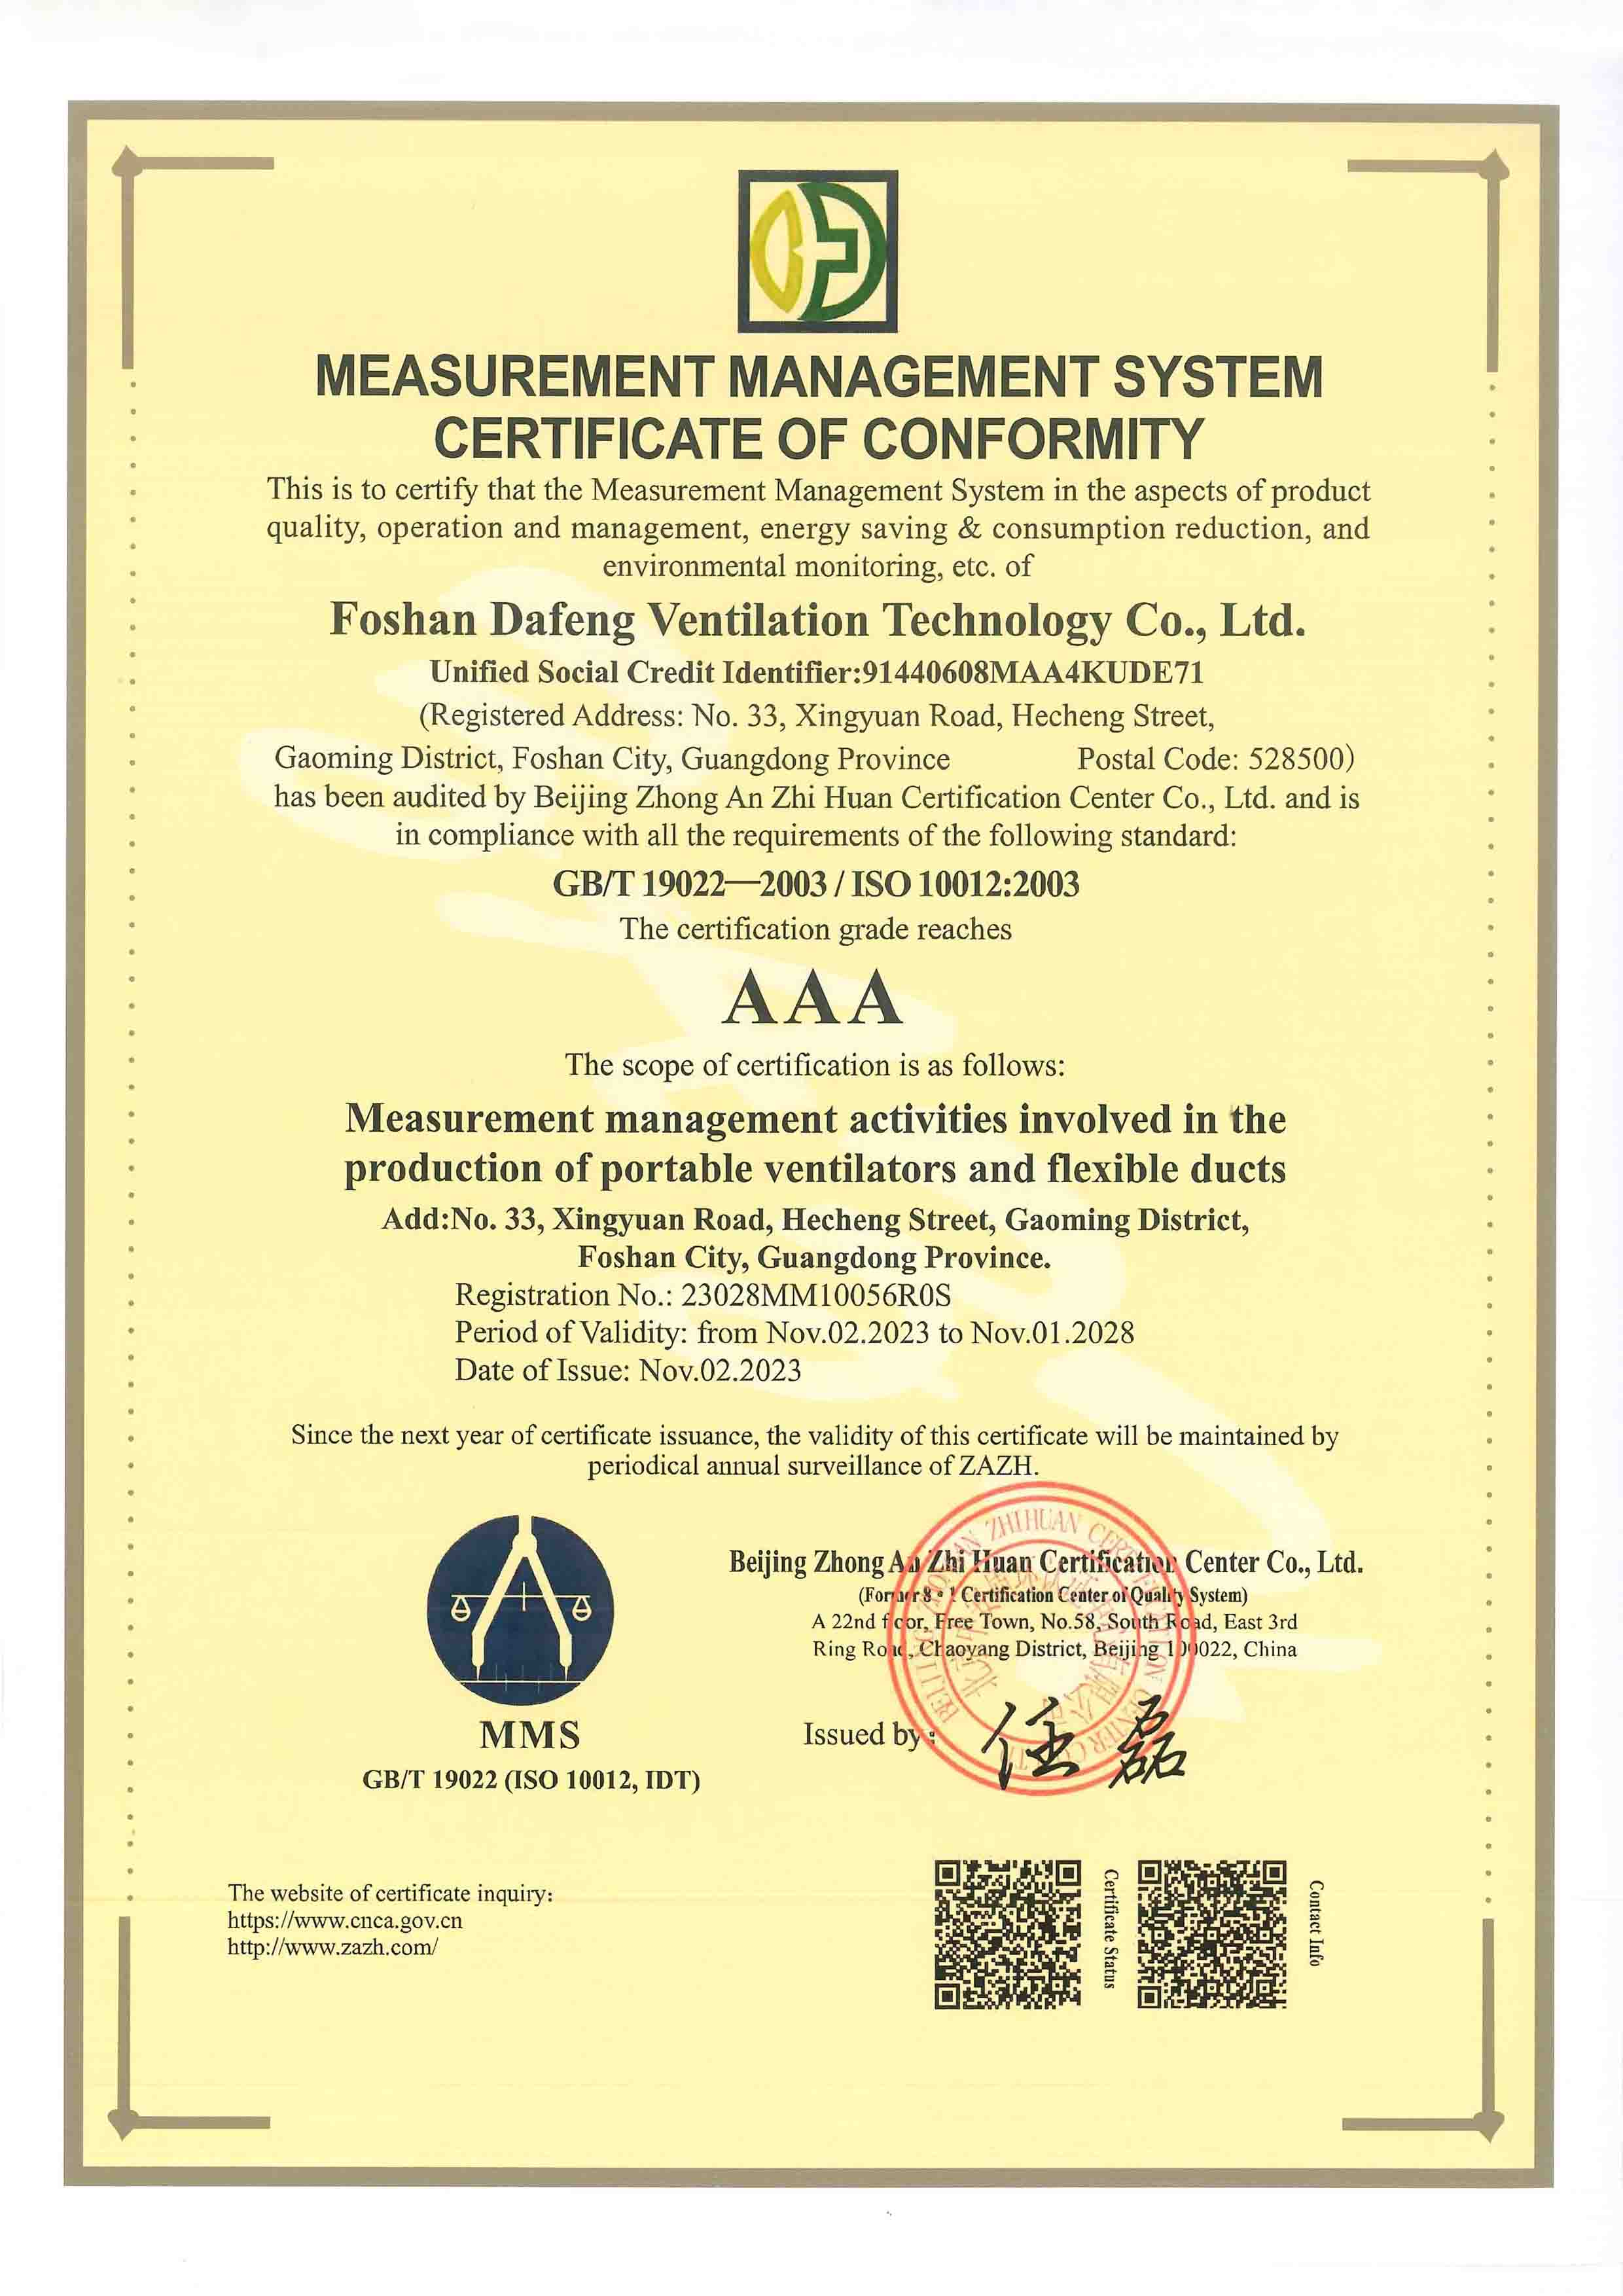 GB/T 19022-2003 / ISO 10012:2003 measurement management system certification